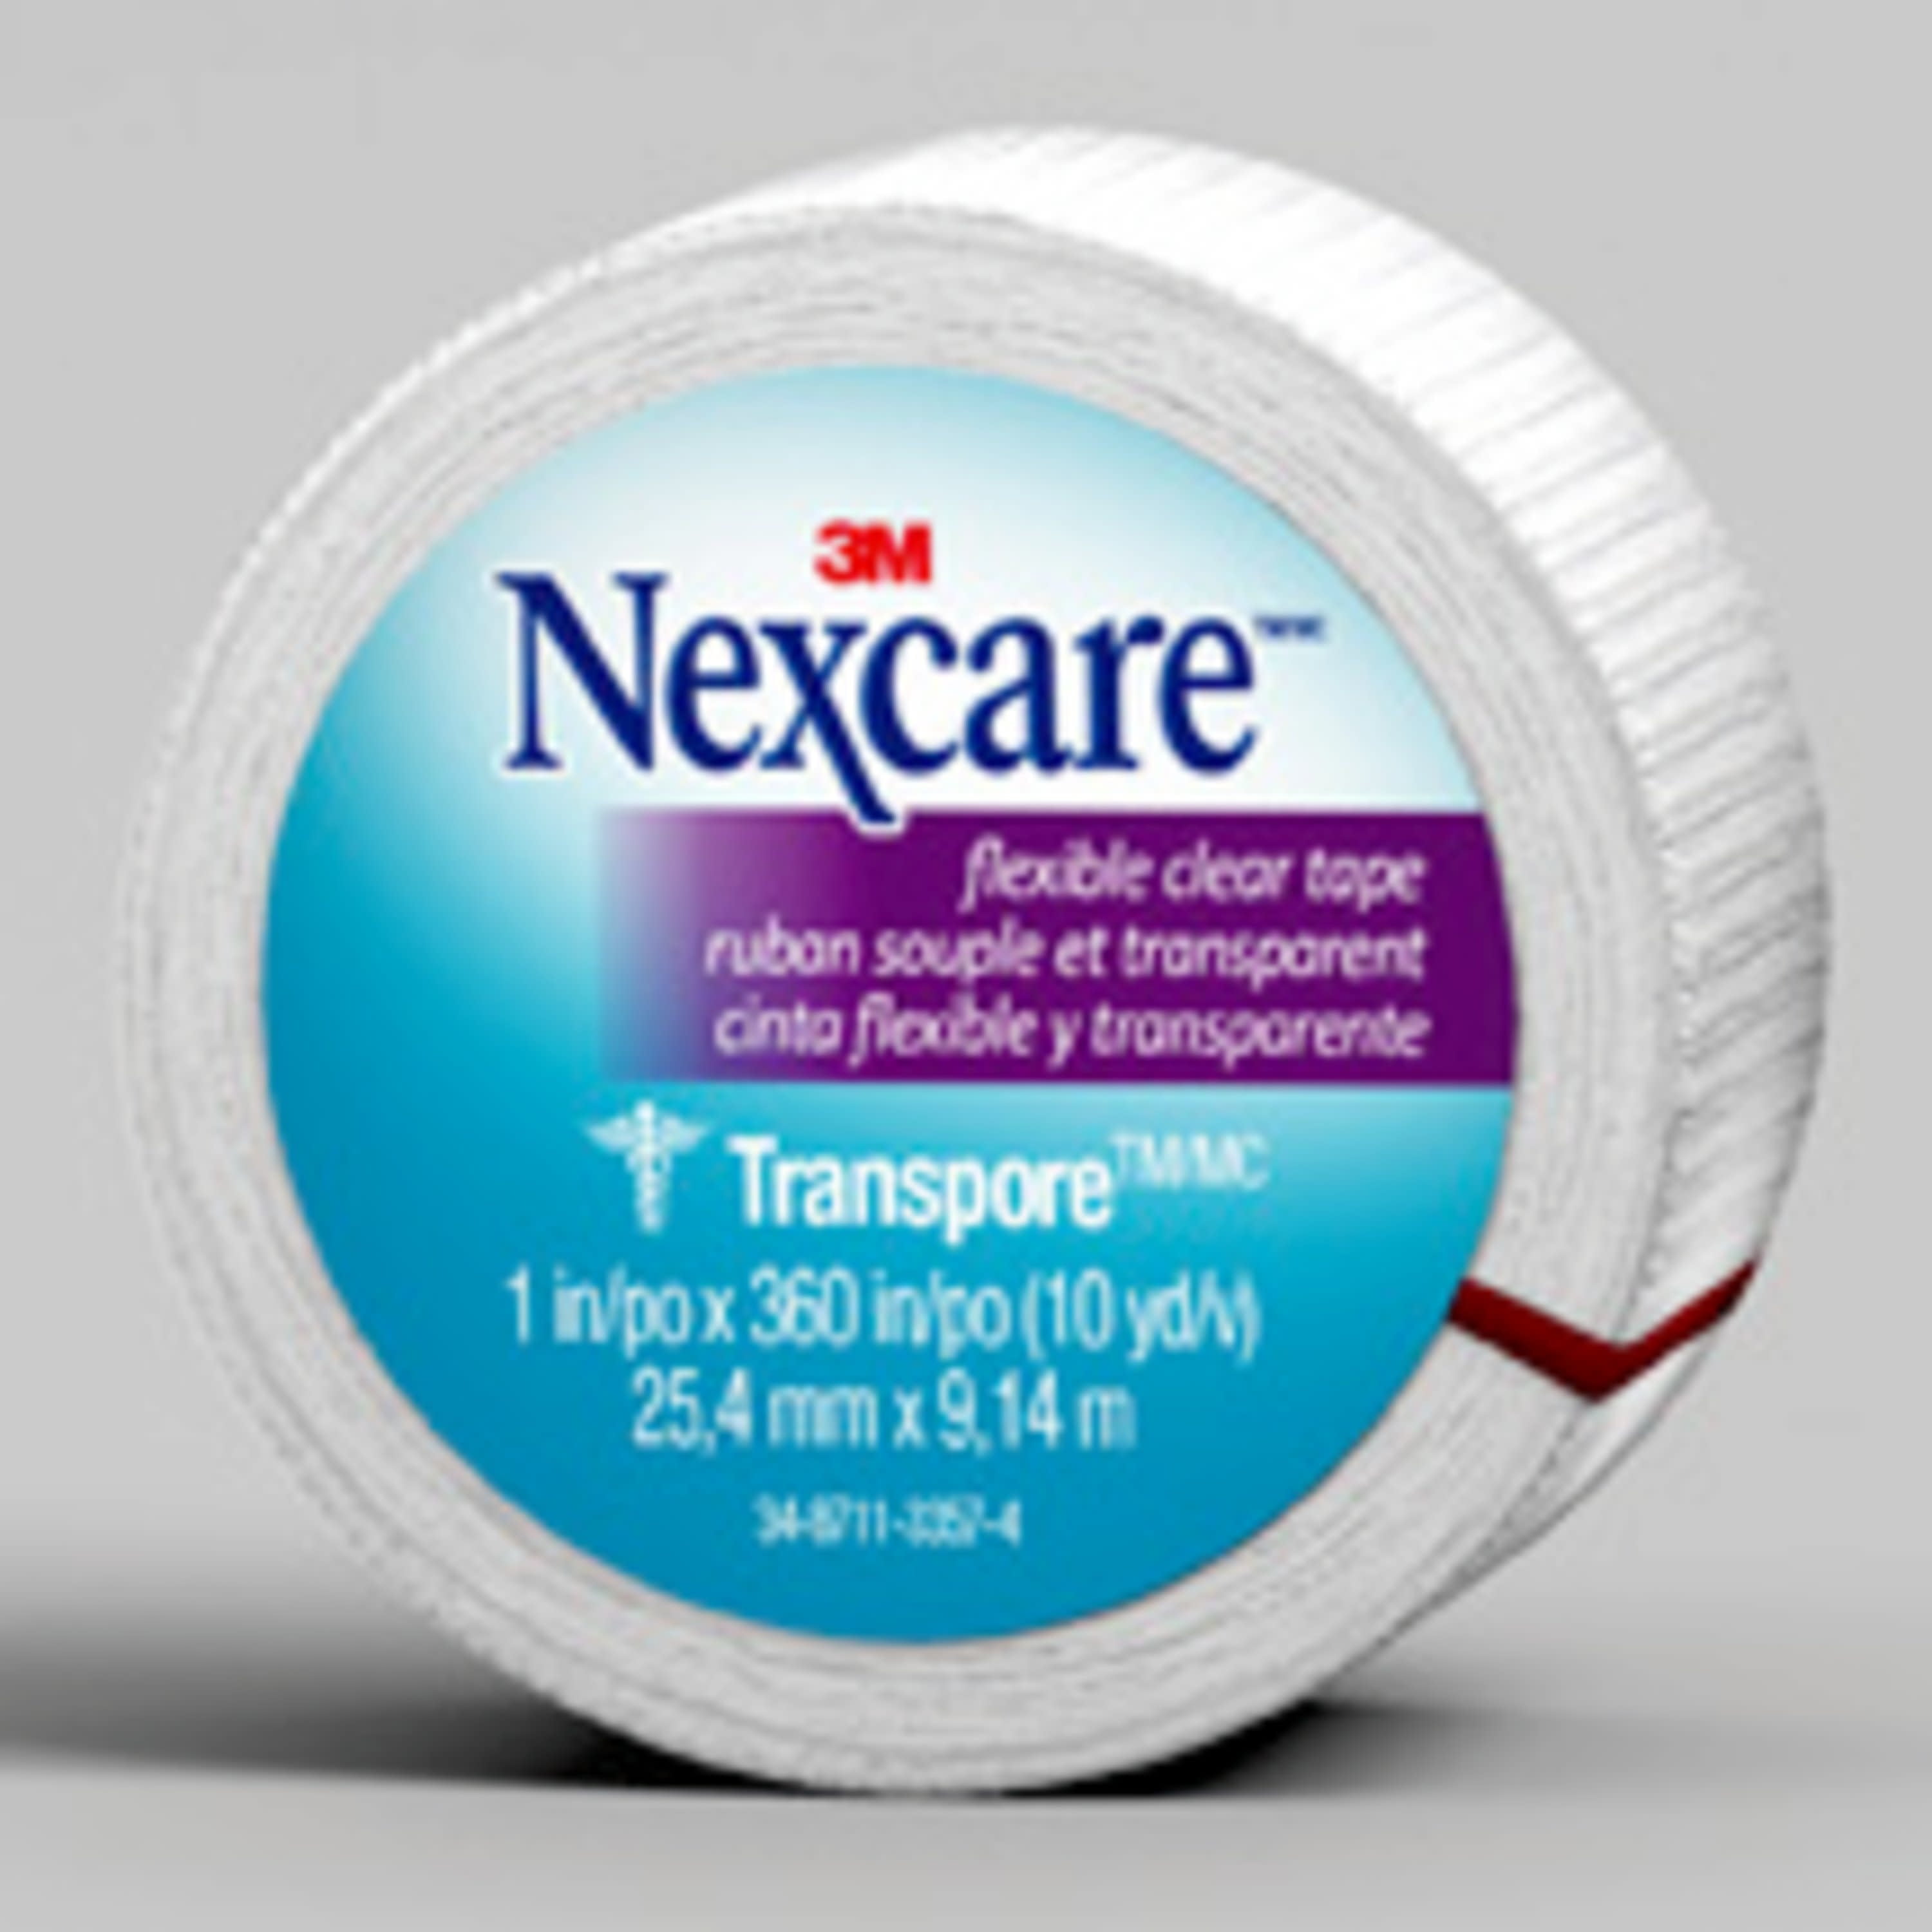 Nexcare Flexible Clear First Aid Tape - 2 count